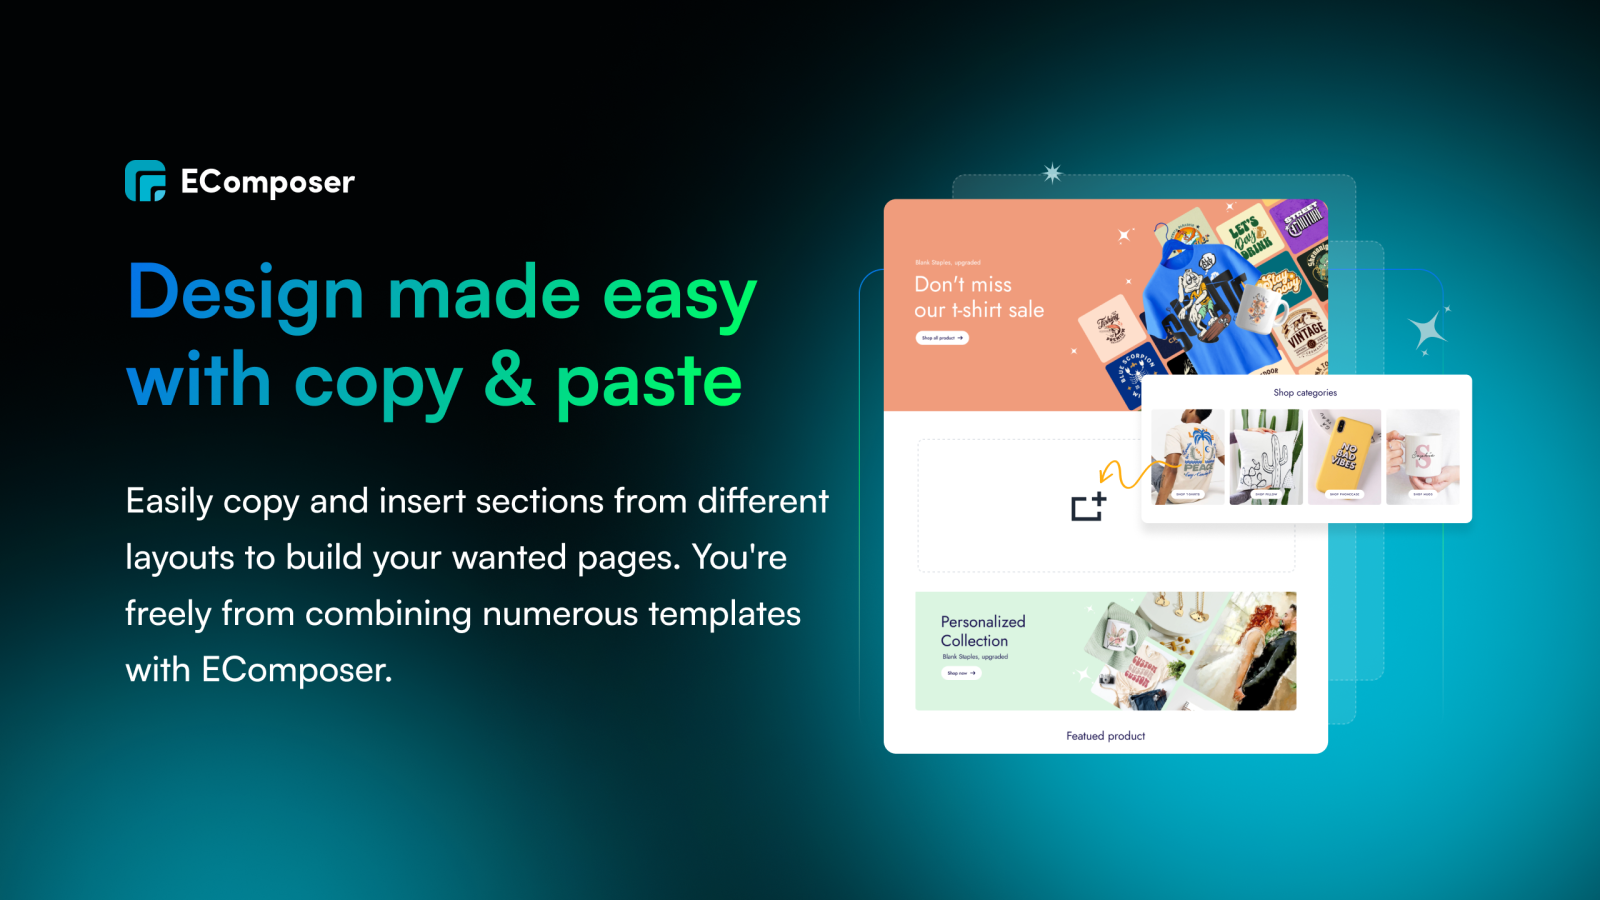 Copy & paste sections to build page